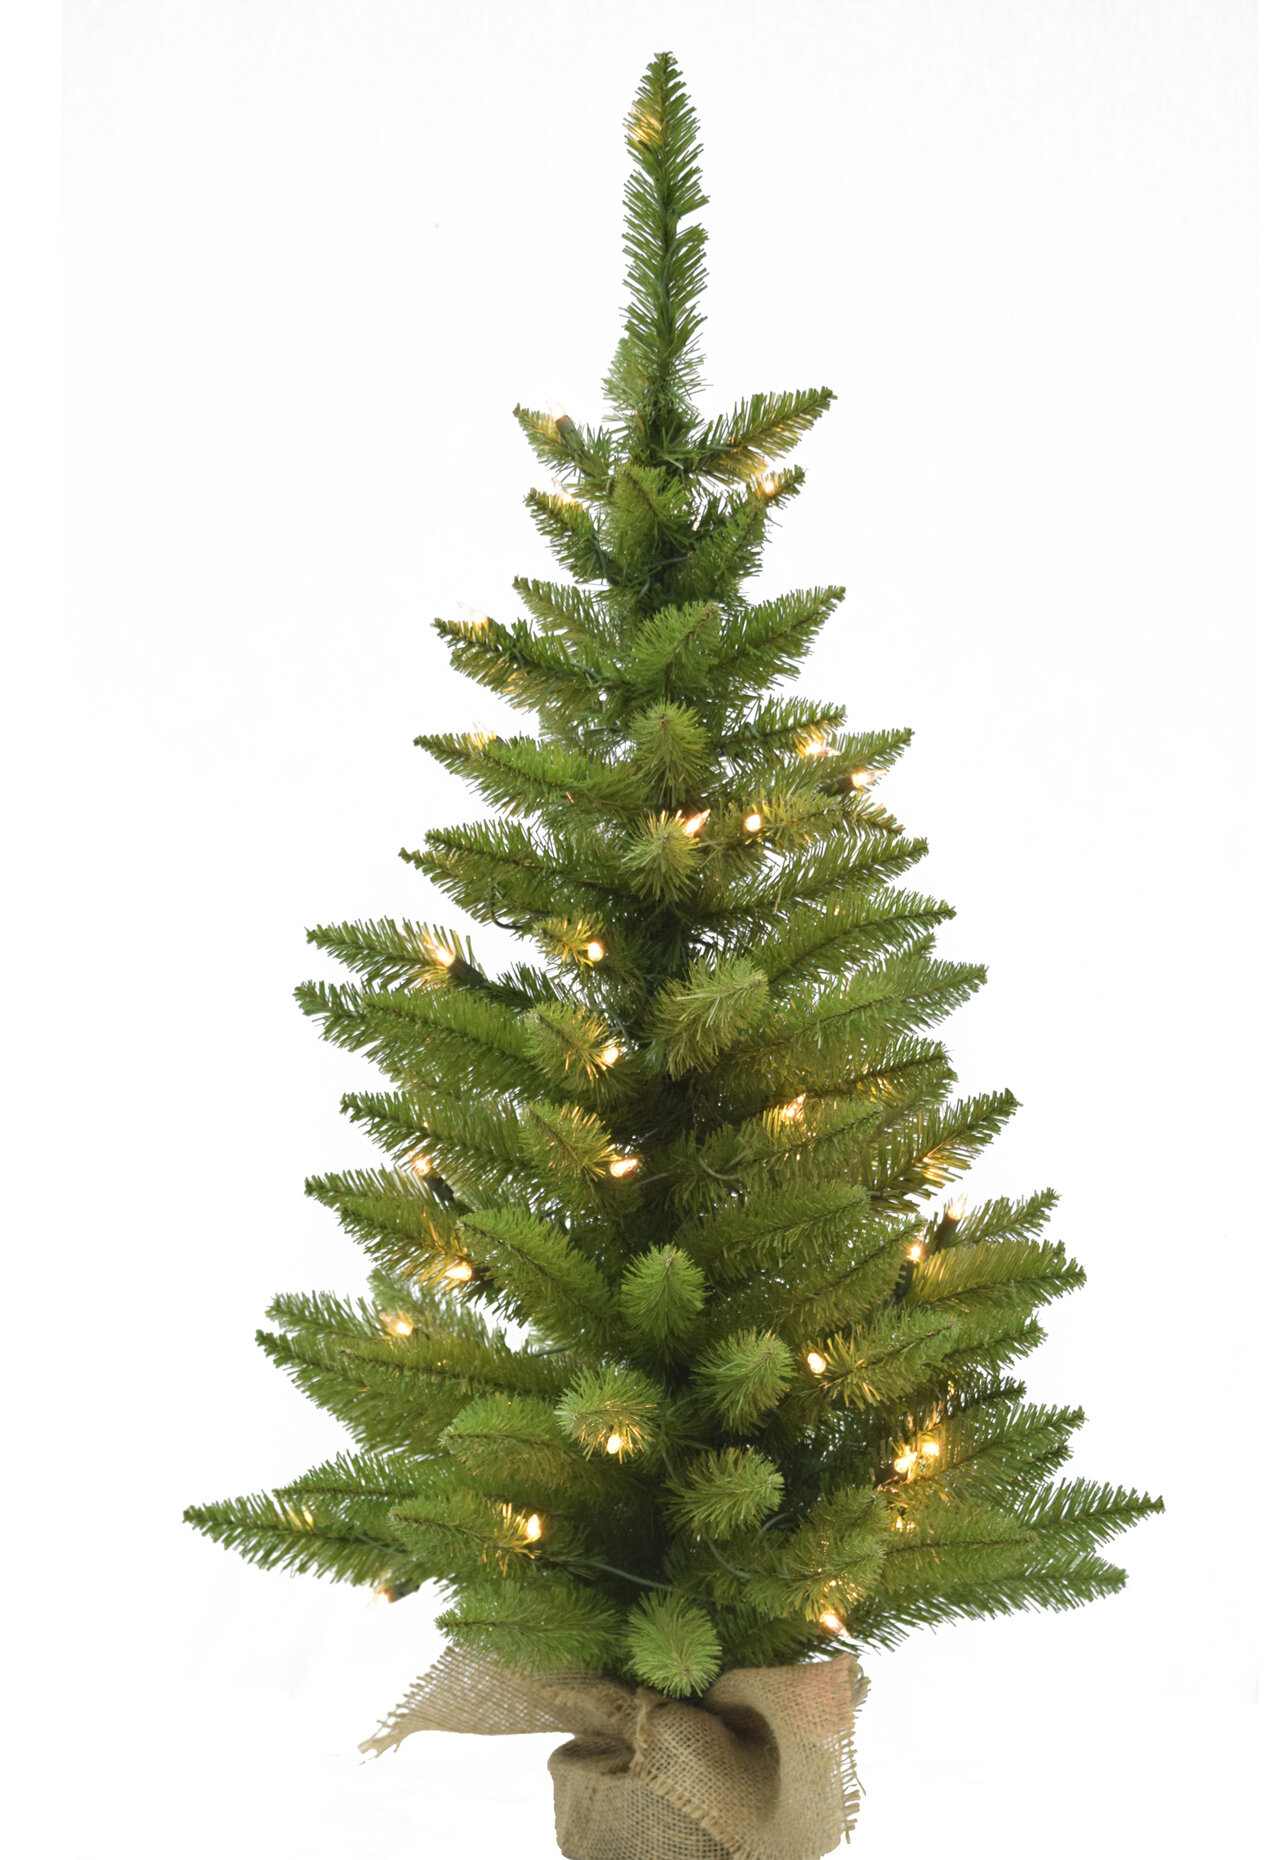 Holiday Frosted Pine Trees Tabletop Decor 12" 18" 20" Set of 3 Green 0999RM 